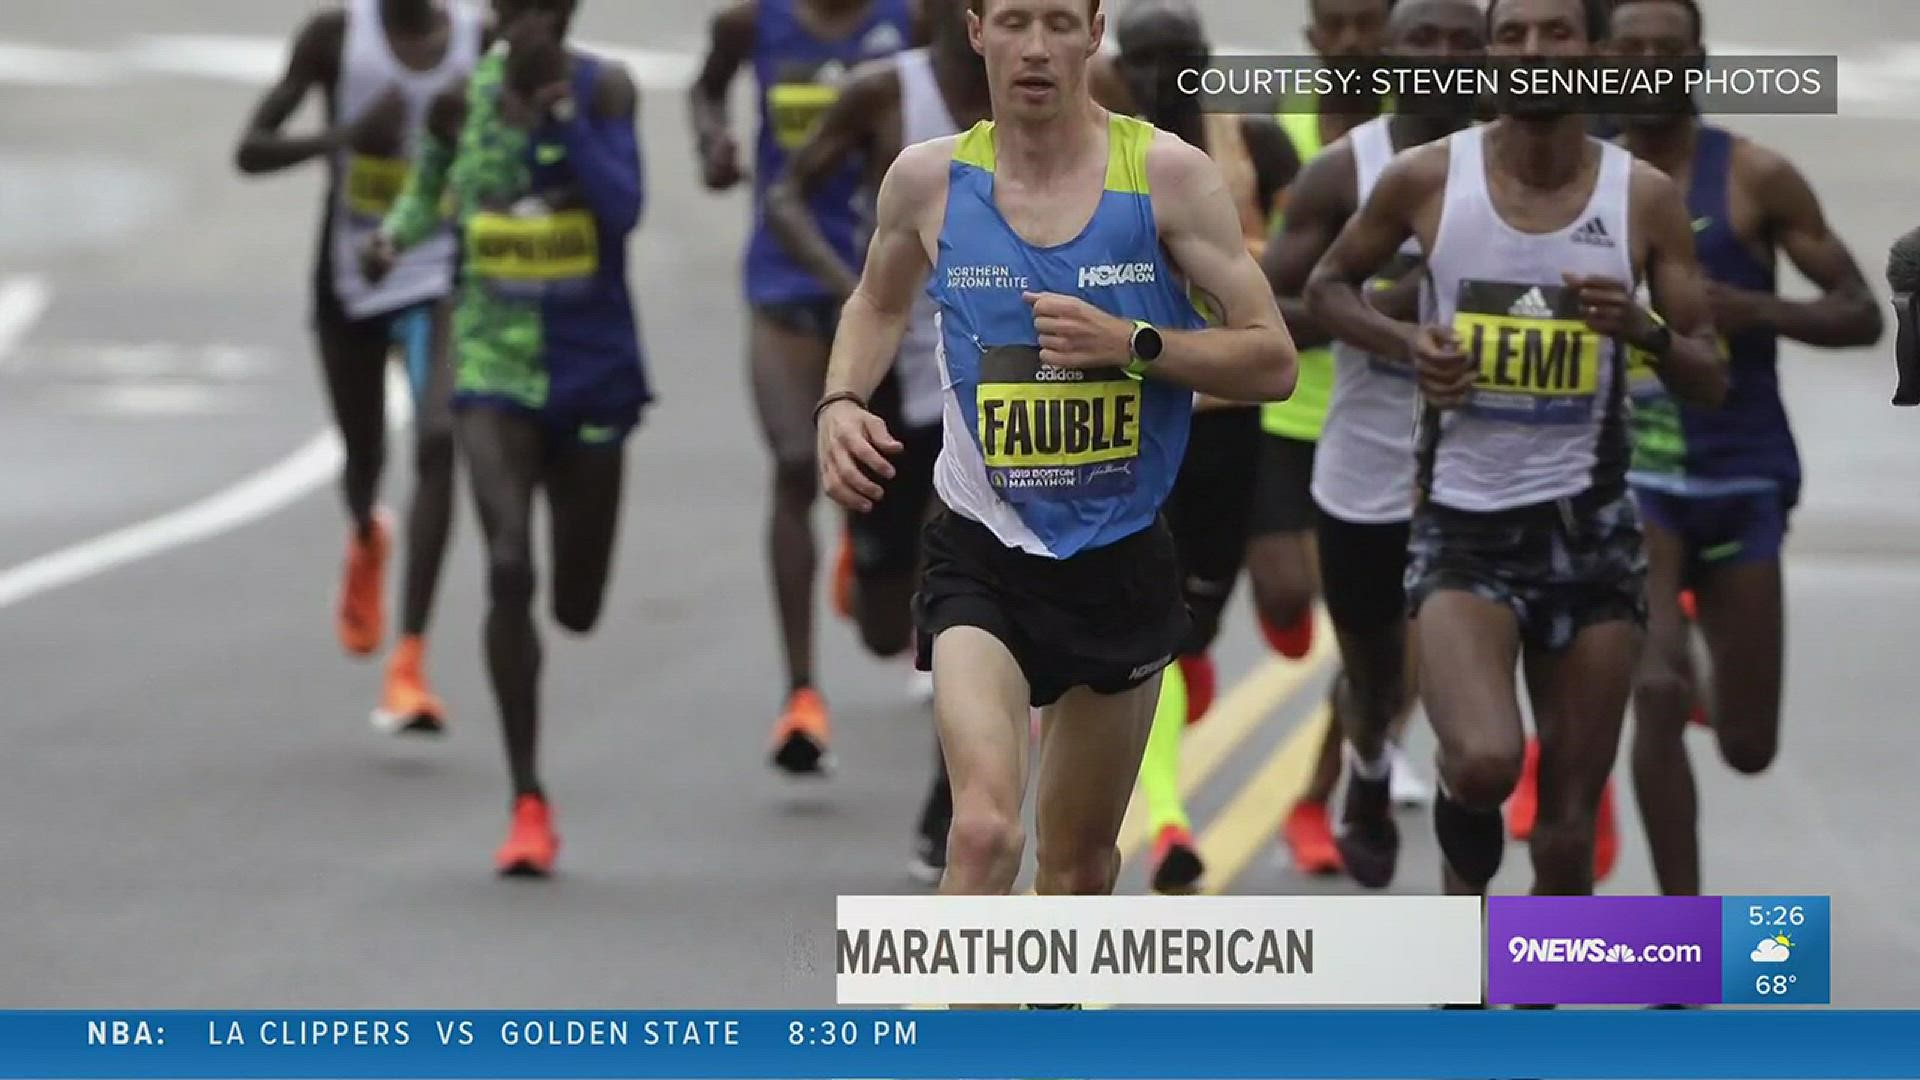 Wheat Ridge alum Scott Fauble finished 7th in the Boston Marathon, the first American to cross the finish line.